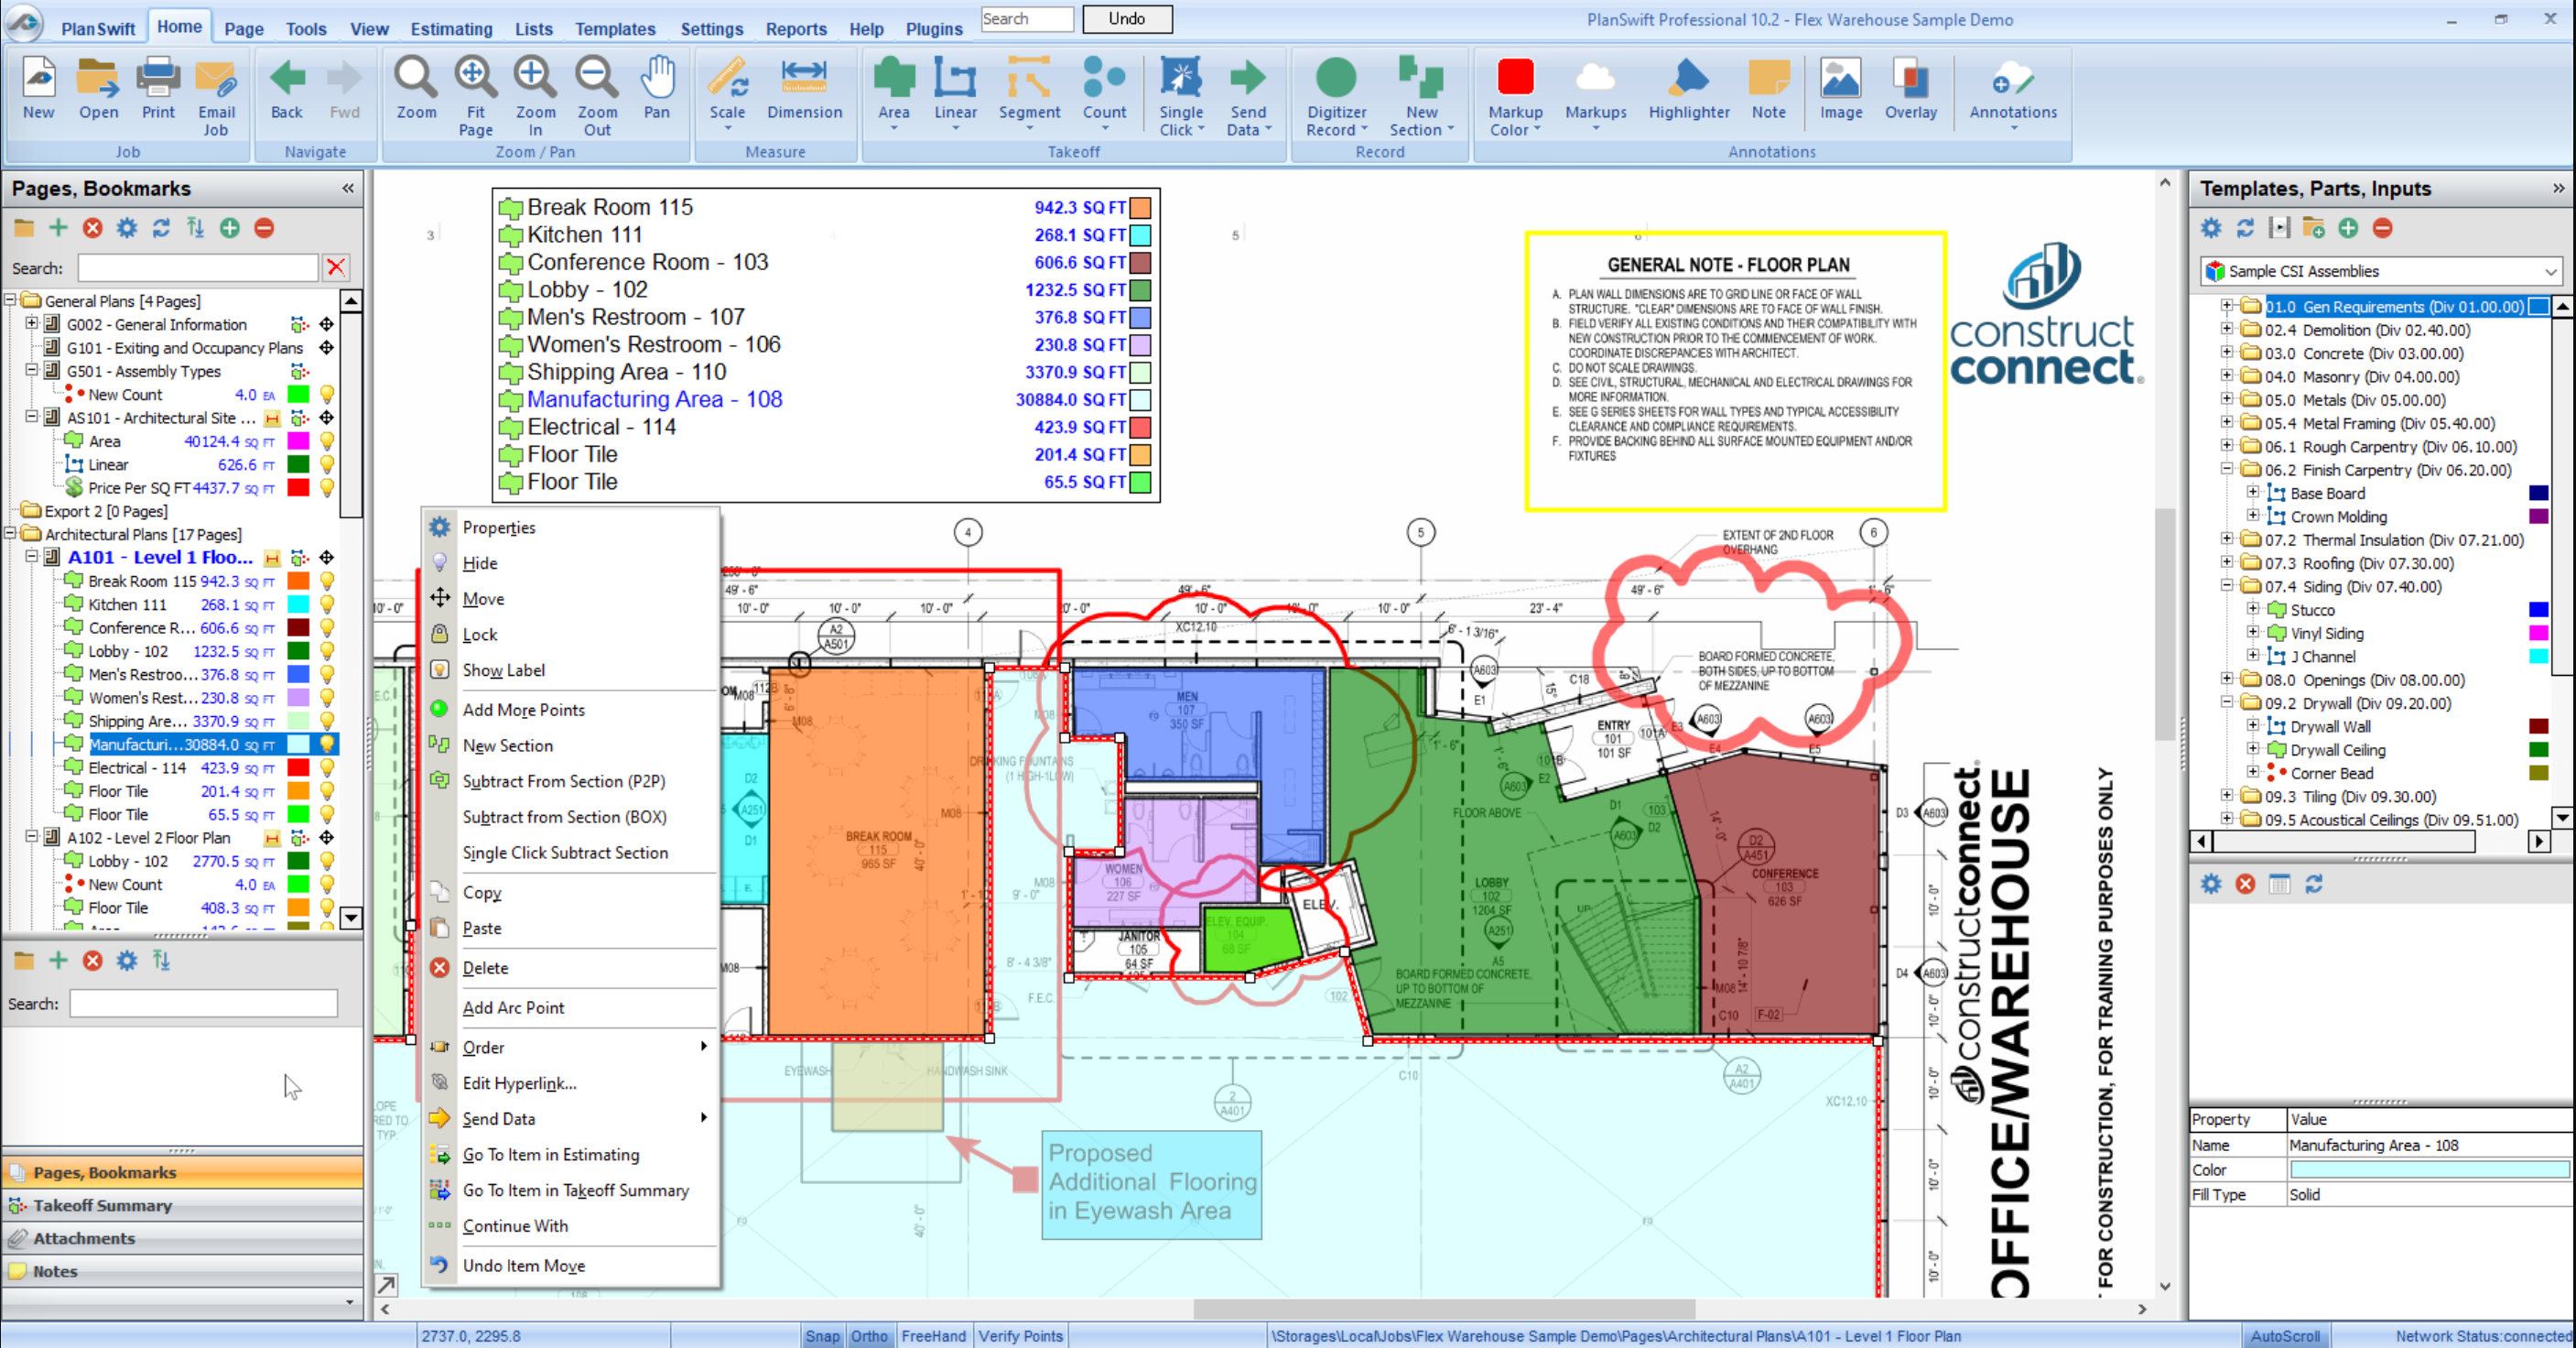 Project Plan in the PlanSwift Software 